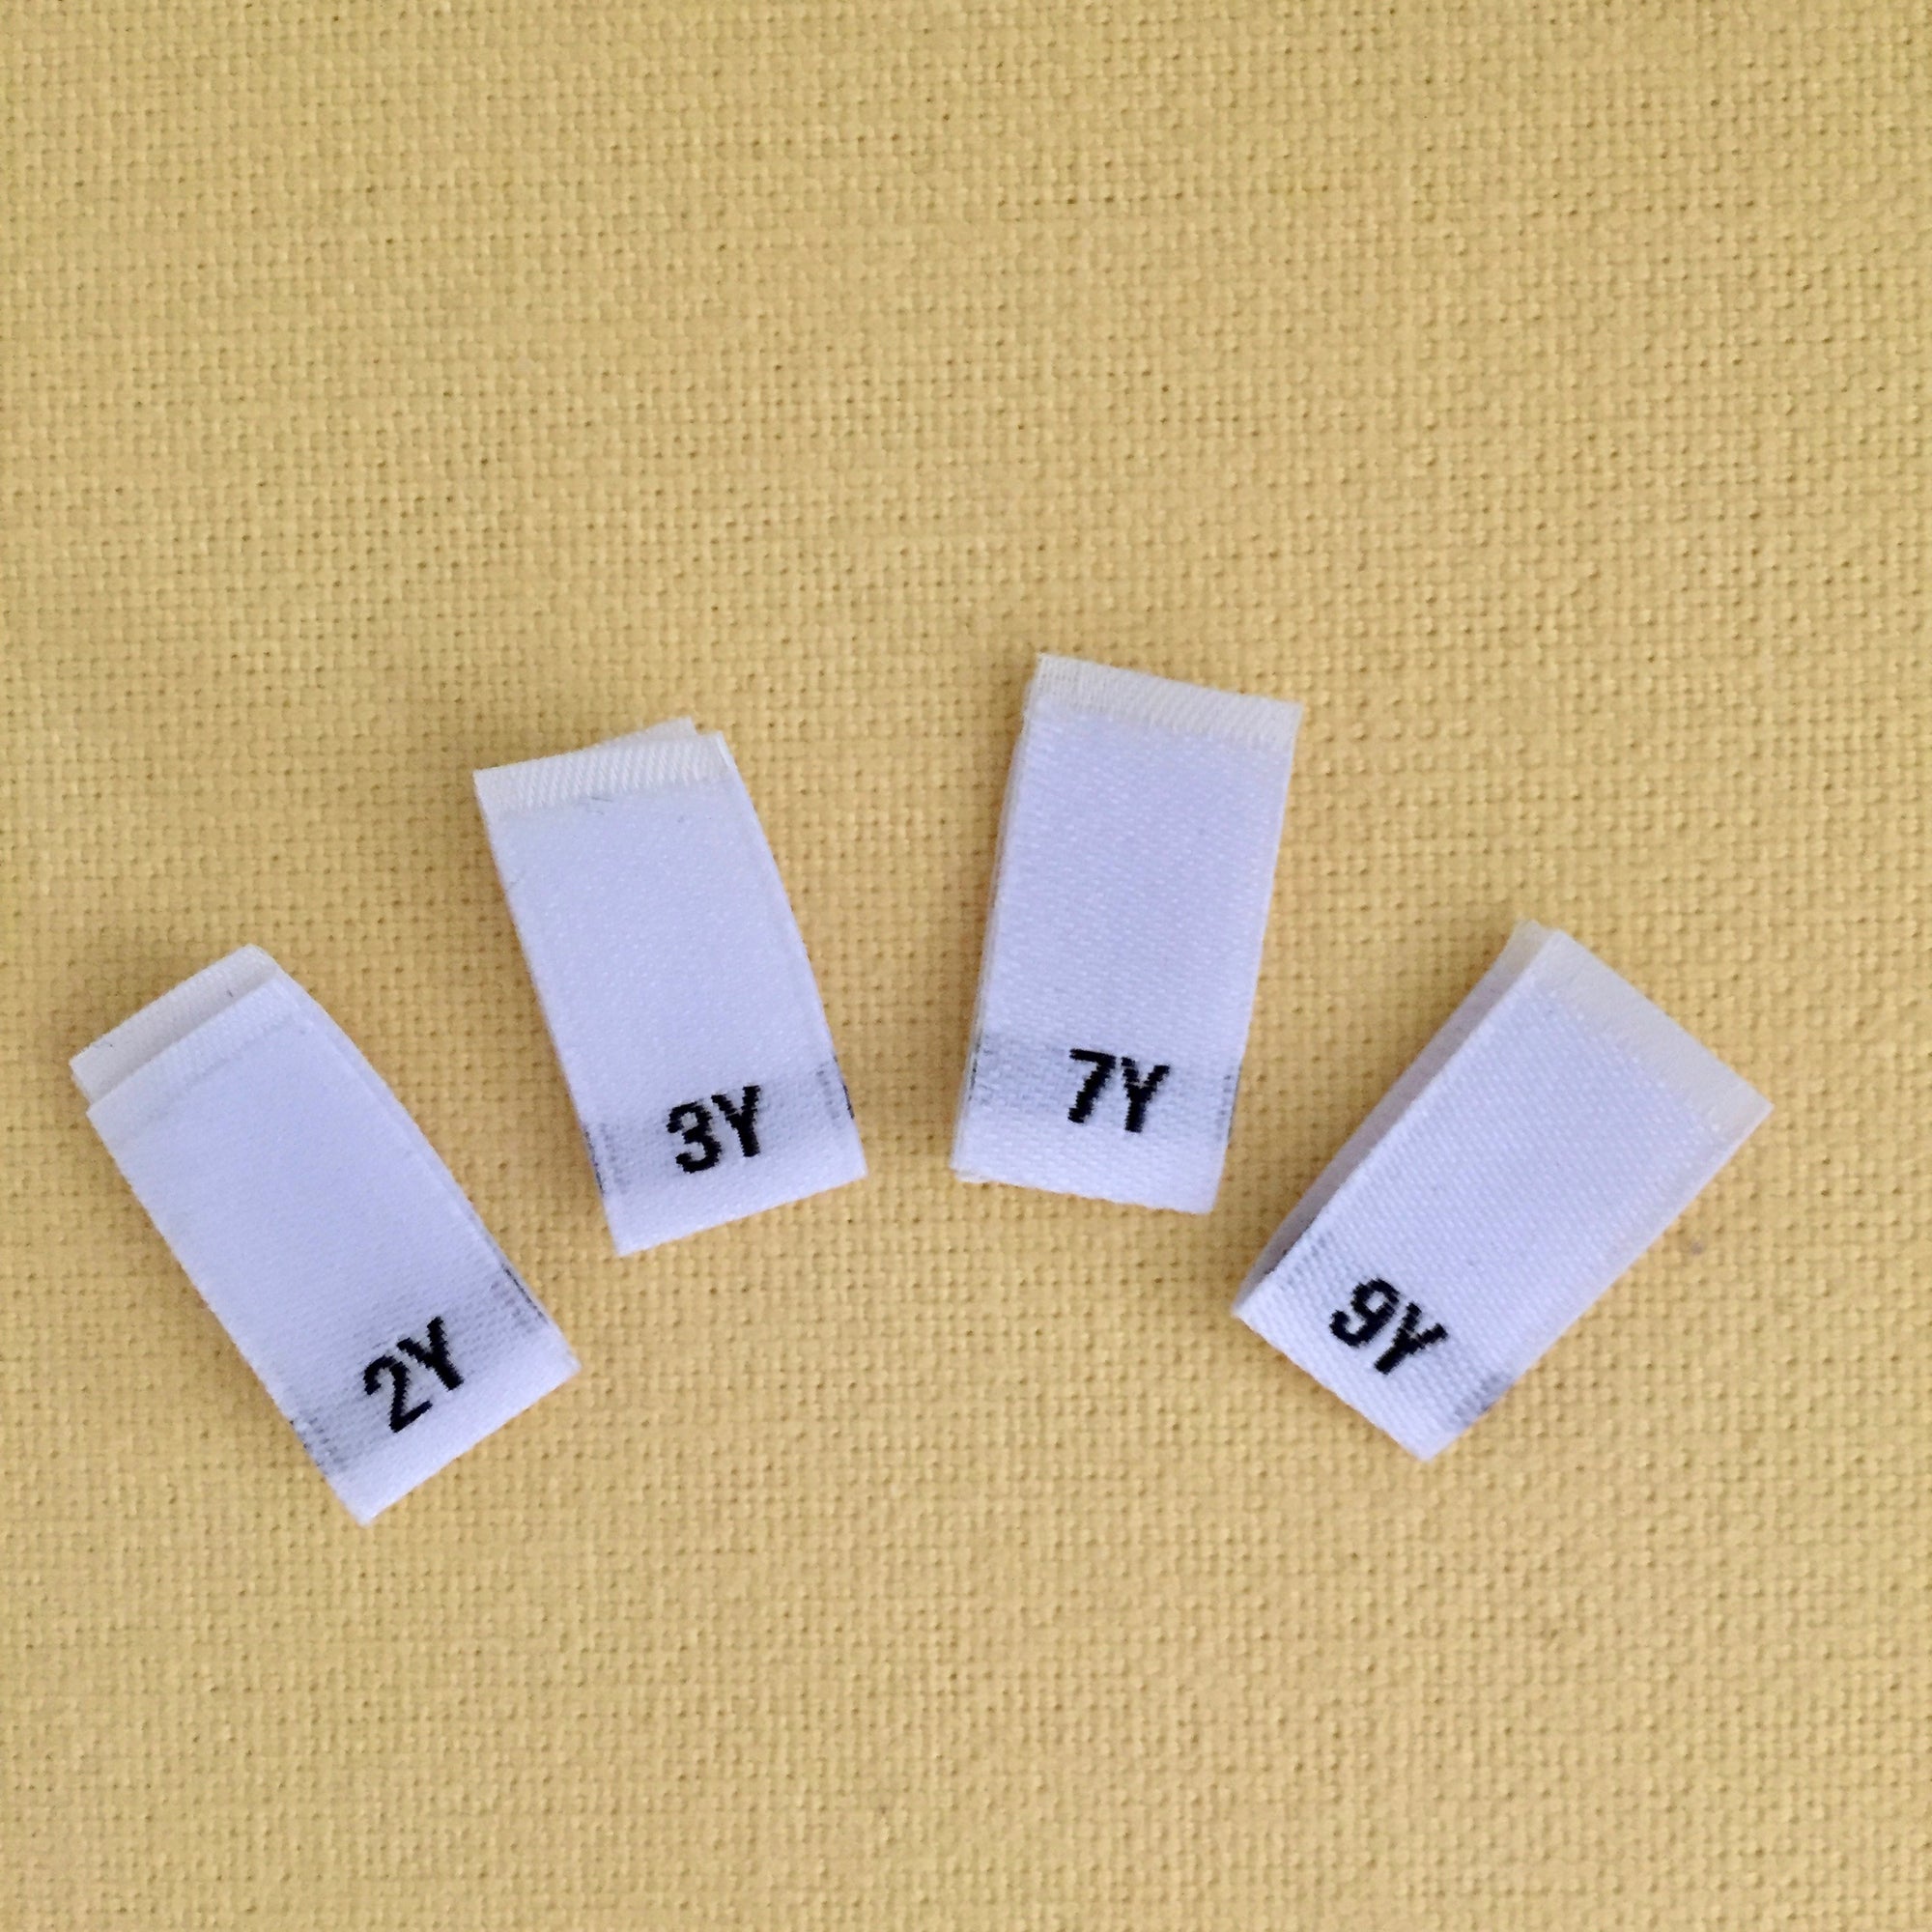 Child Clothing Size Labels (White) - Sew-in Labels, Clothing Tags